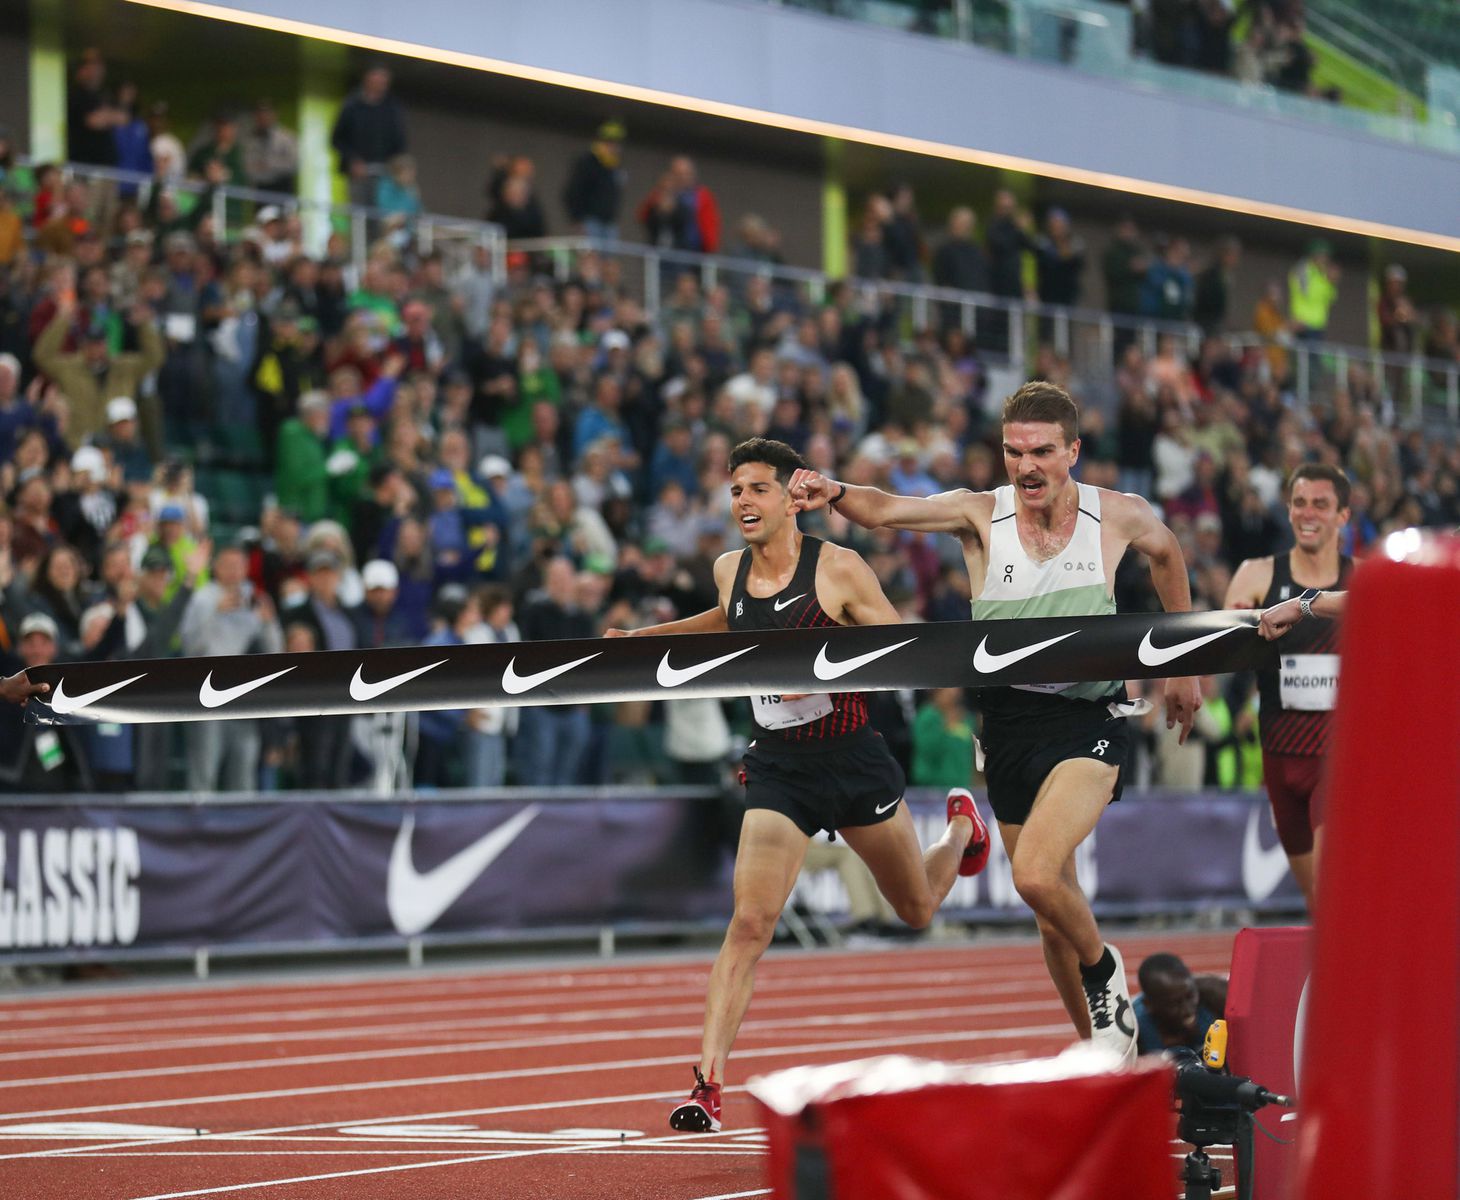 Joe Klecker (right) edges Grant Fisher of the Bowerman Track Club to win the USA Track & Field men's 10,000-meter championship race on Friday, May 27, 2022, in the Prefontaine Classic at Hayward Field in Eugene. Klecker and Fisher earned spots on Team USA for the World Athletics Championships in July at Hayward Field.